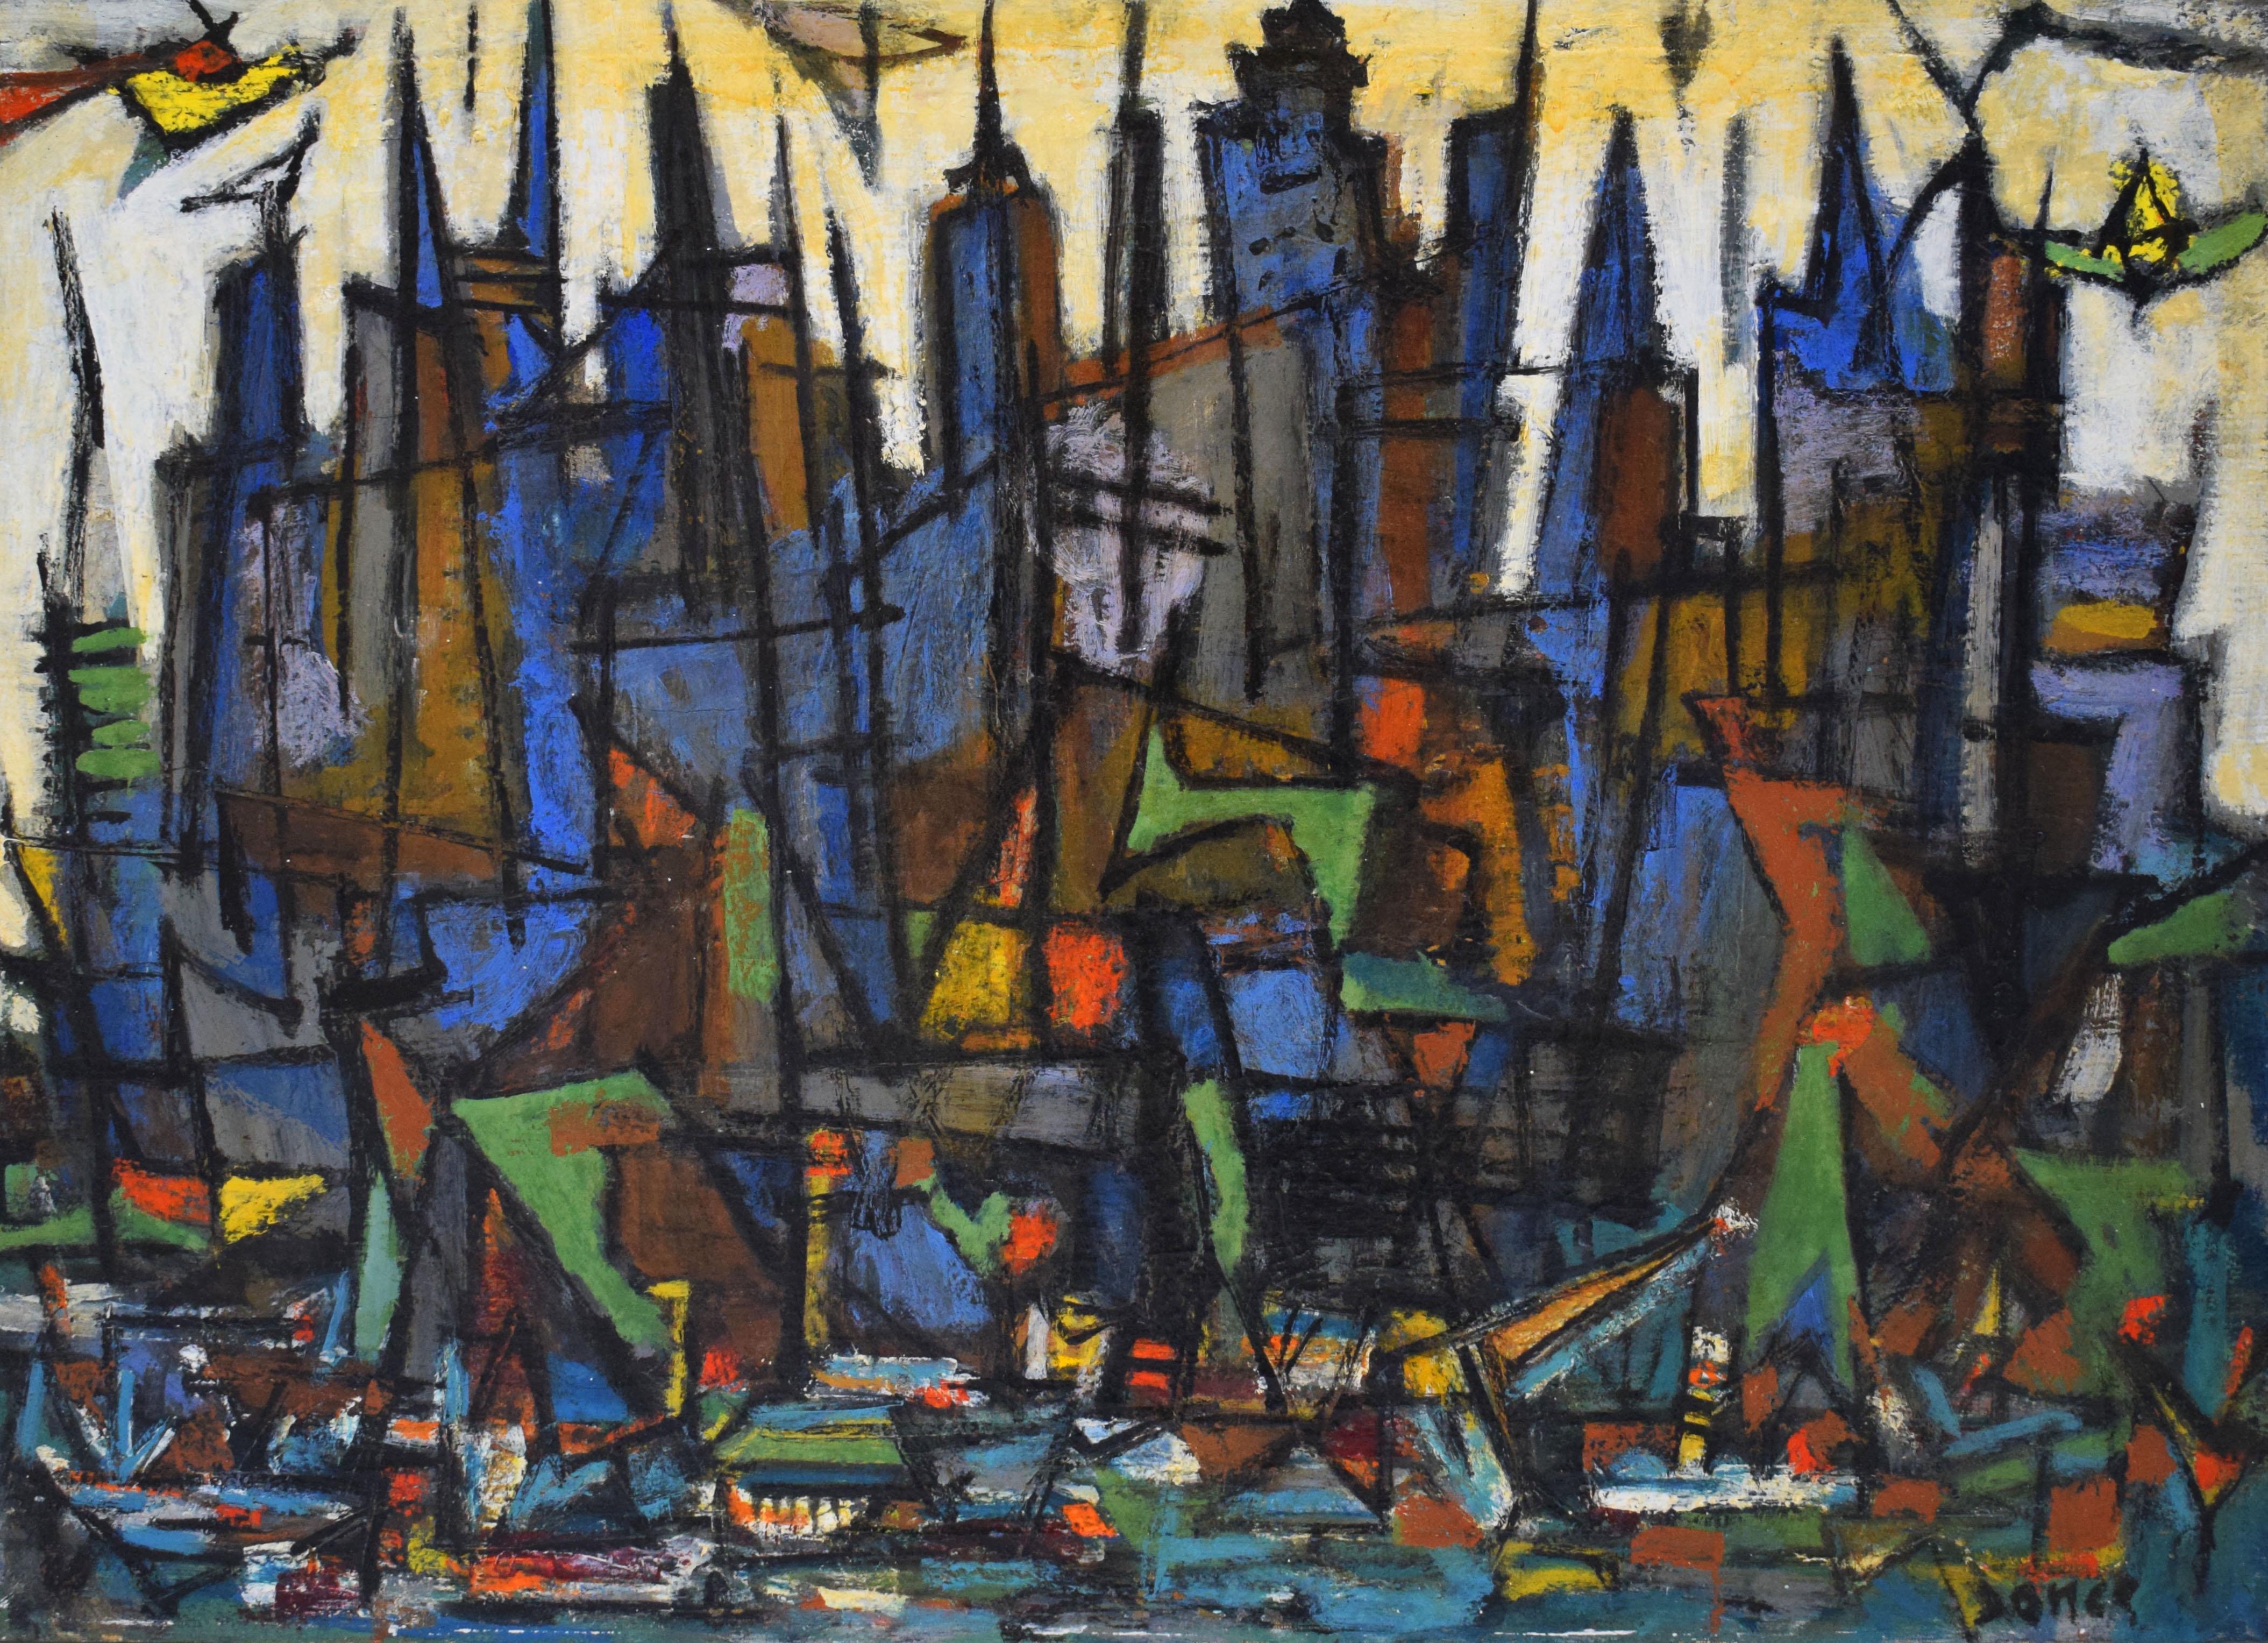 Marcel Janco Landscape Painting - Harbour View - Cityscape Abstract Dada Romanian Israeli